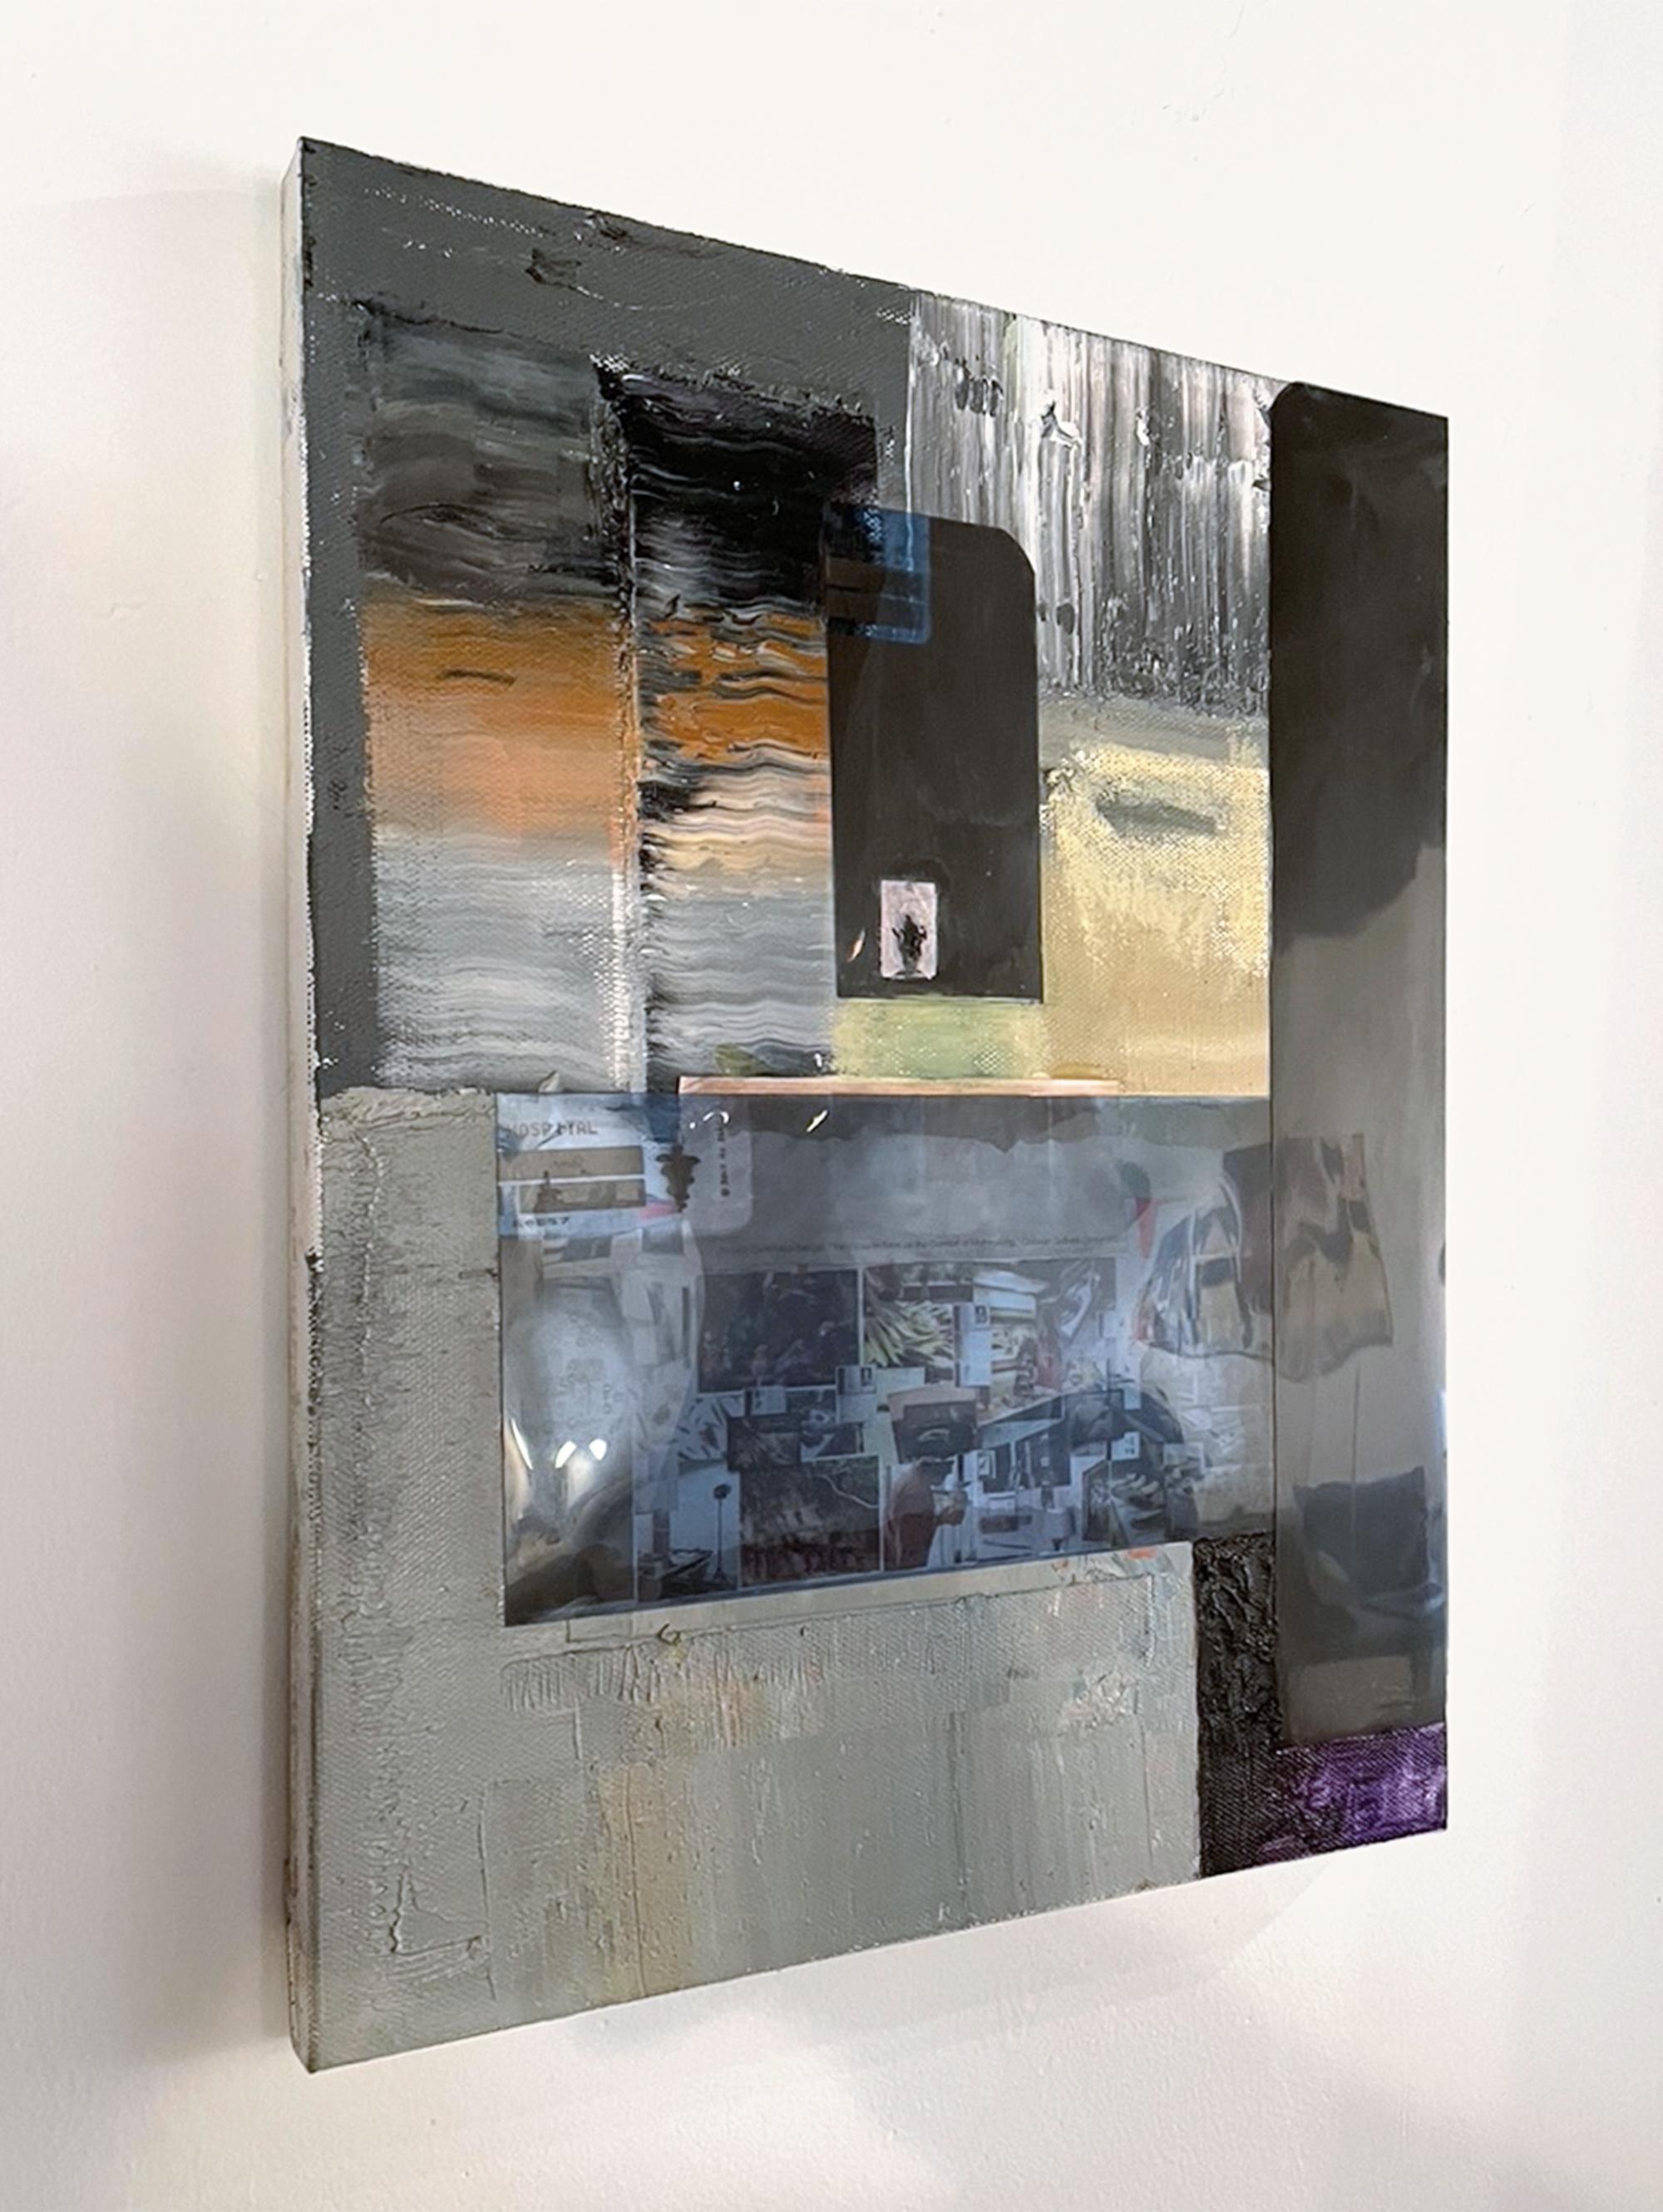 Painted primarily in oil and encaustic with a cement trowel on wood panel and canvas, his work has been exhibited and collected across the US. In the midst of creating these mobile relationships in space, areas of bold color meet with specific edges